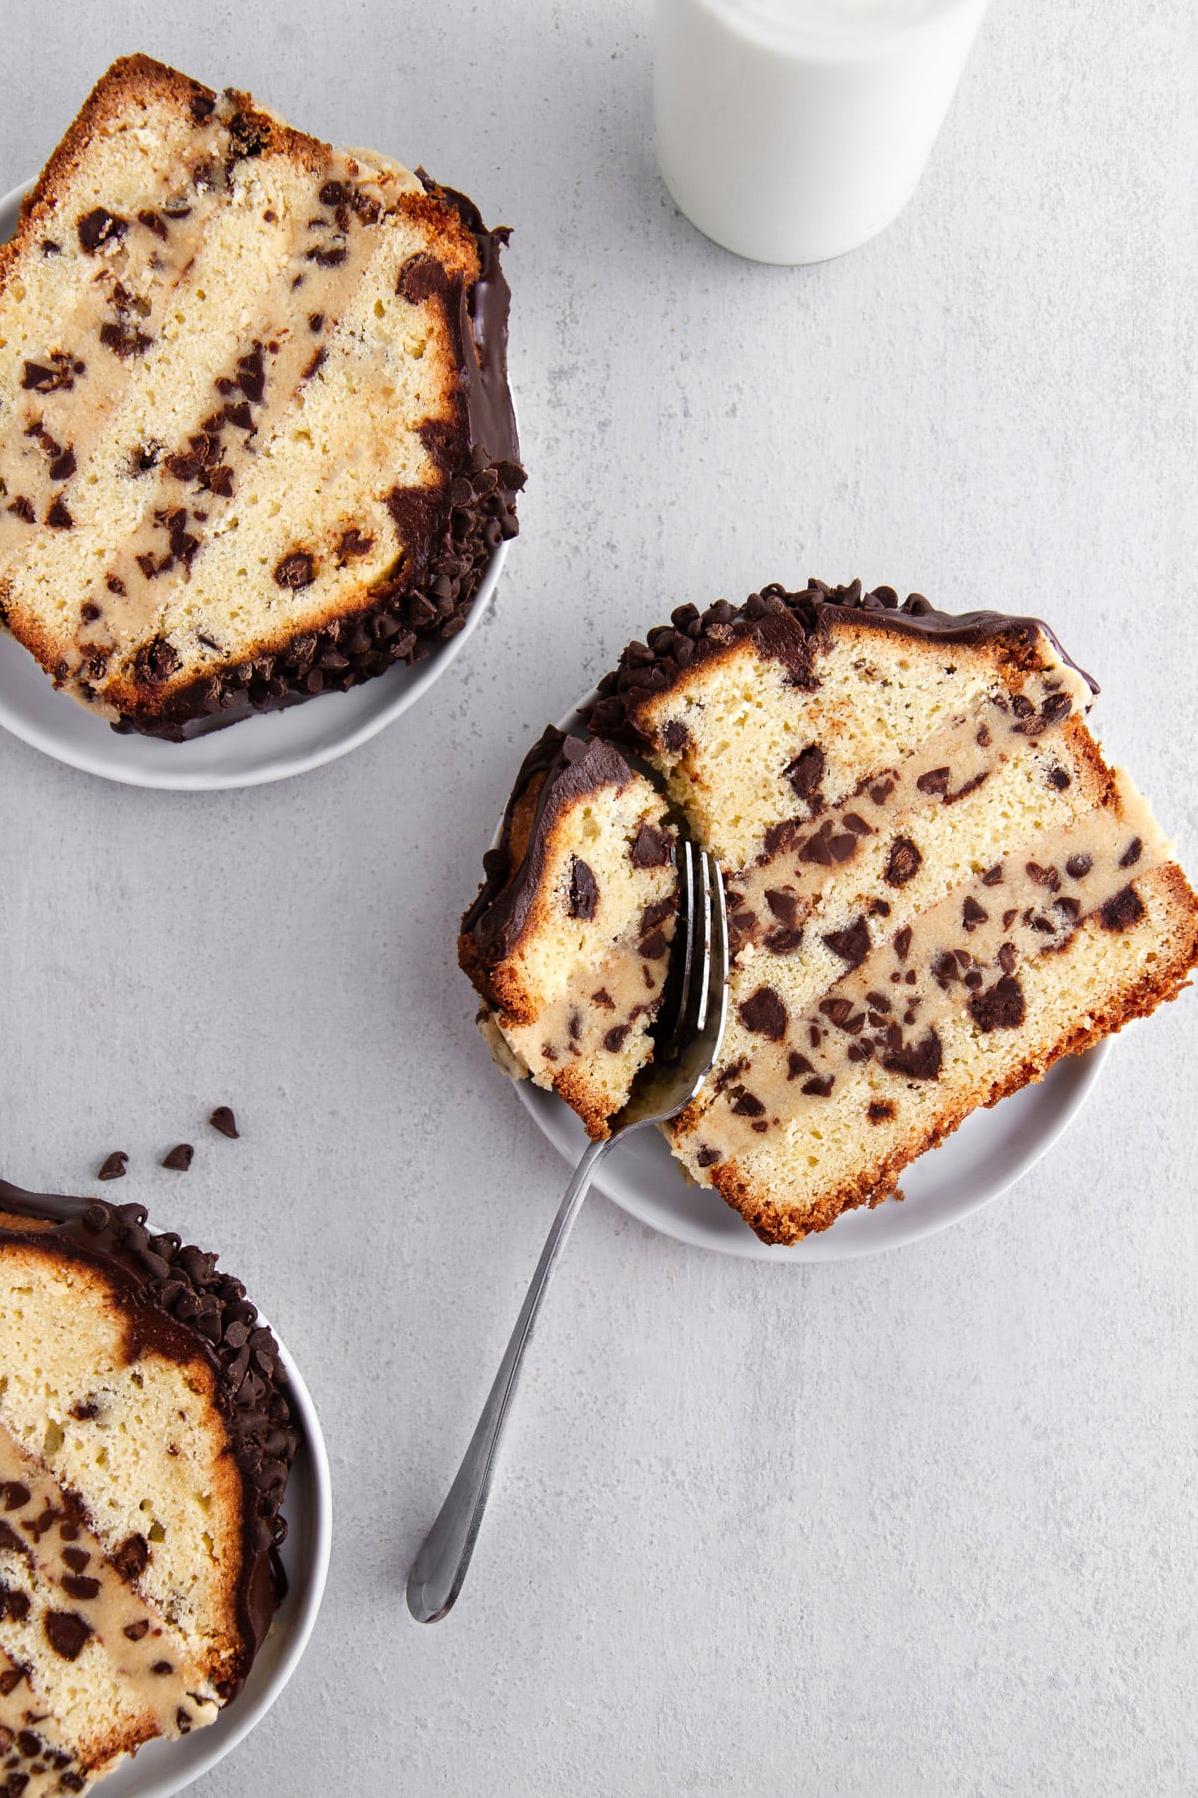  Get ready to be transported to chocolate heaven with this rich and moist cake.